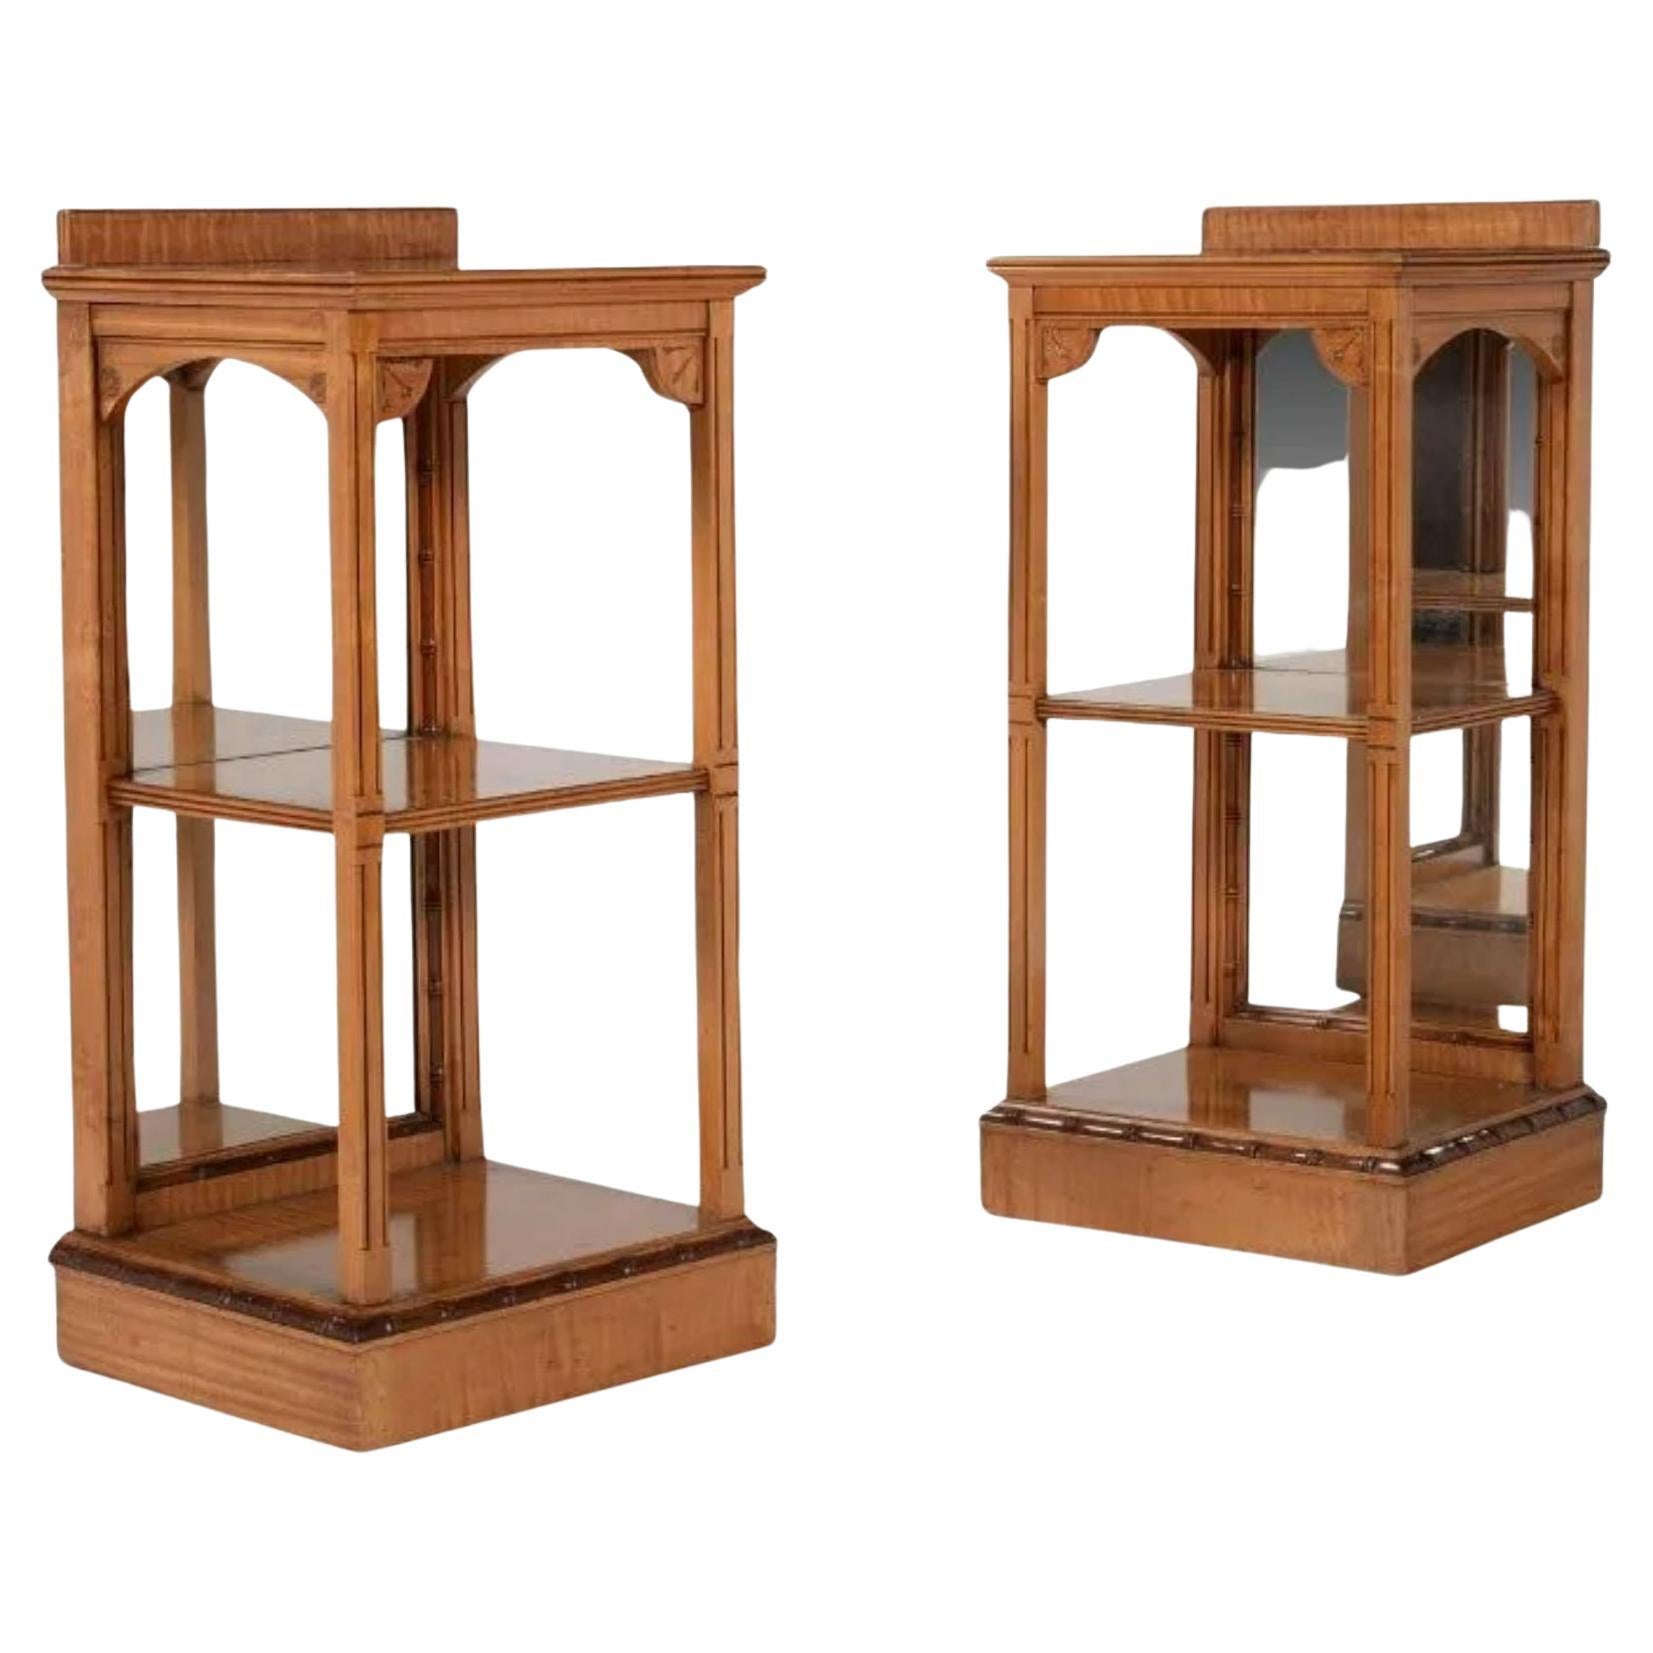 Pair of Aesthetic Movement Bedside Tables, circa 1890